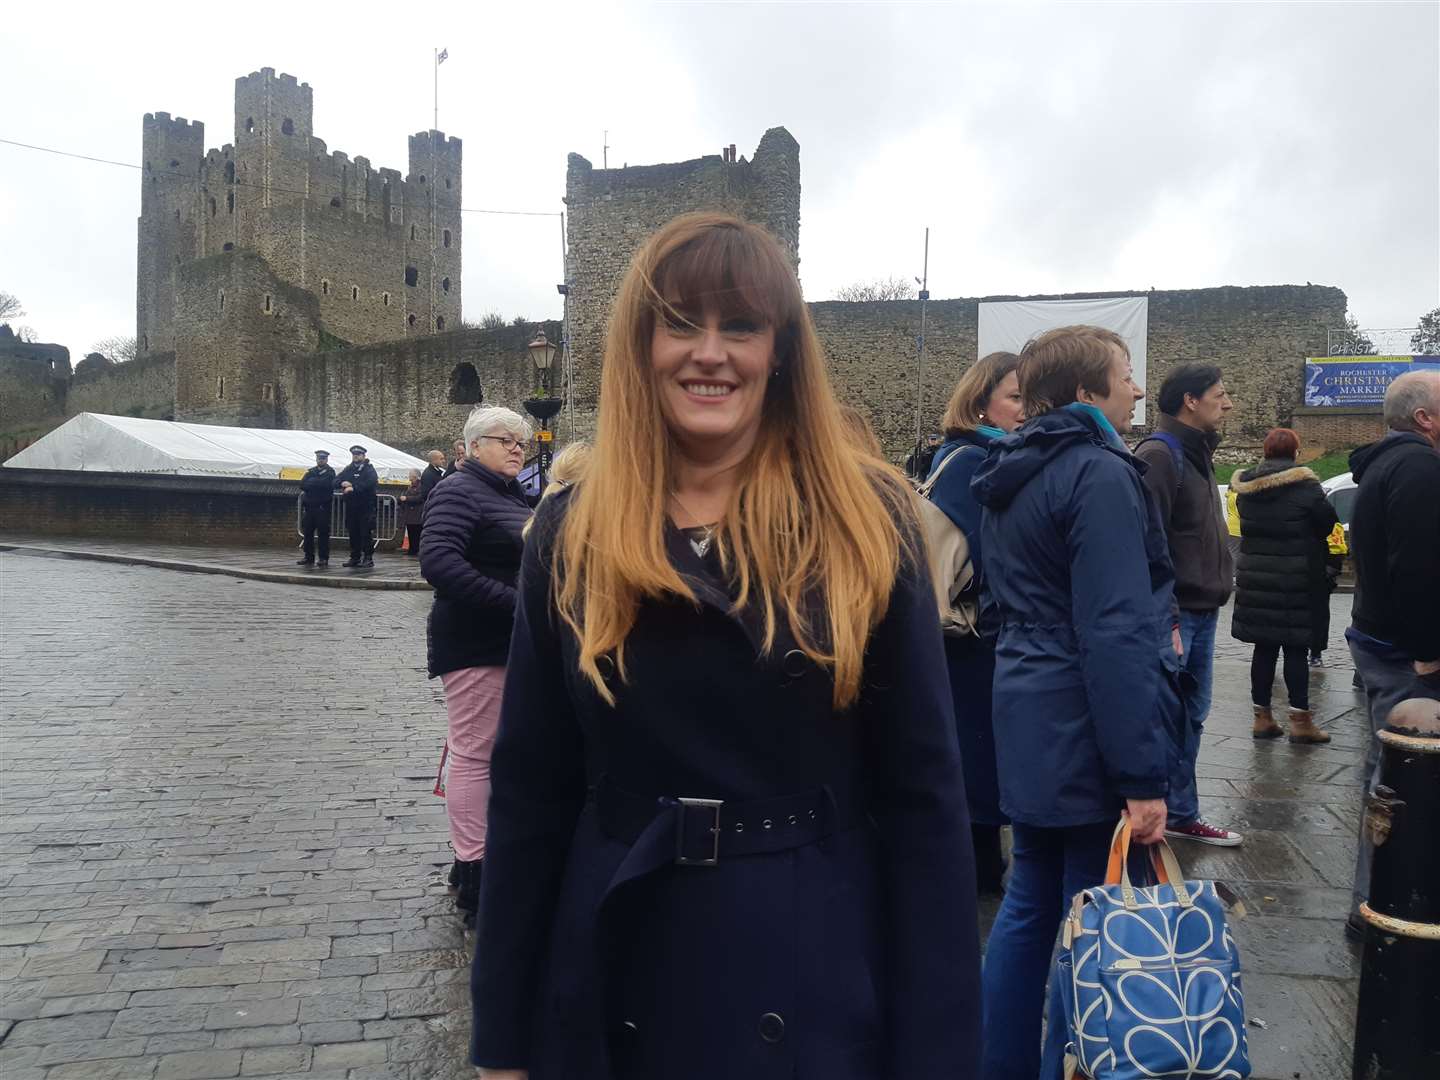 Tory candidate Kelly Tolhurst at the event